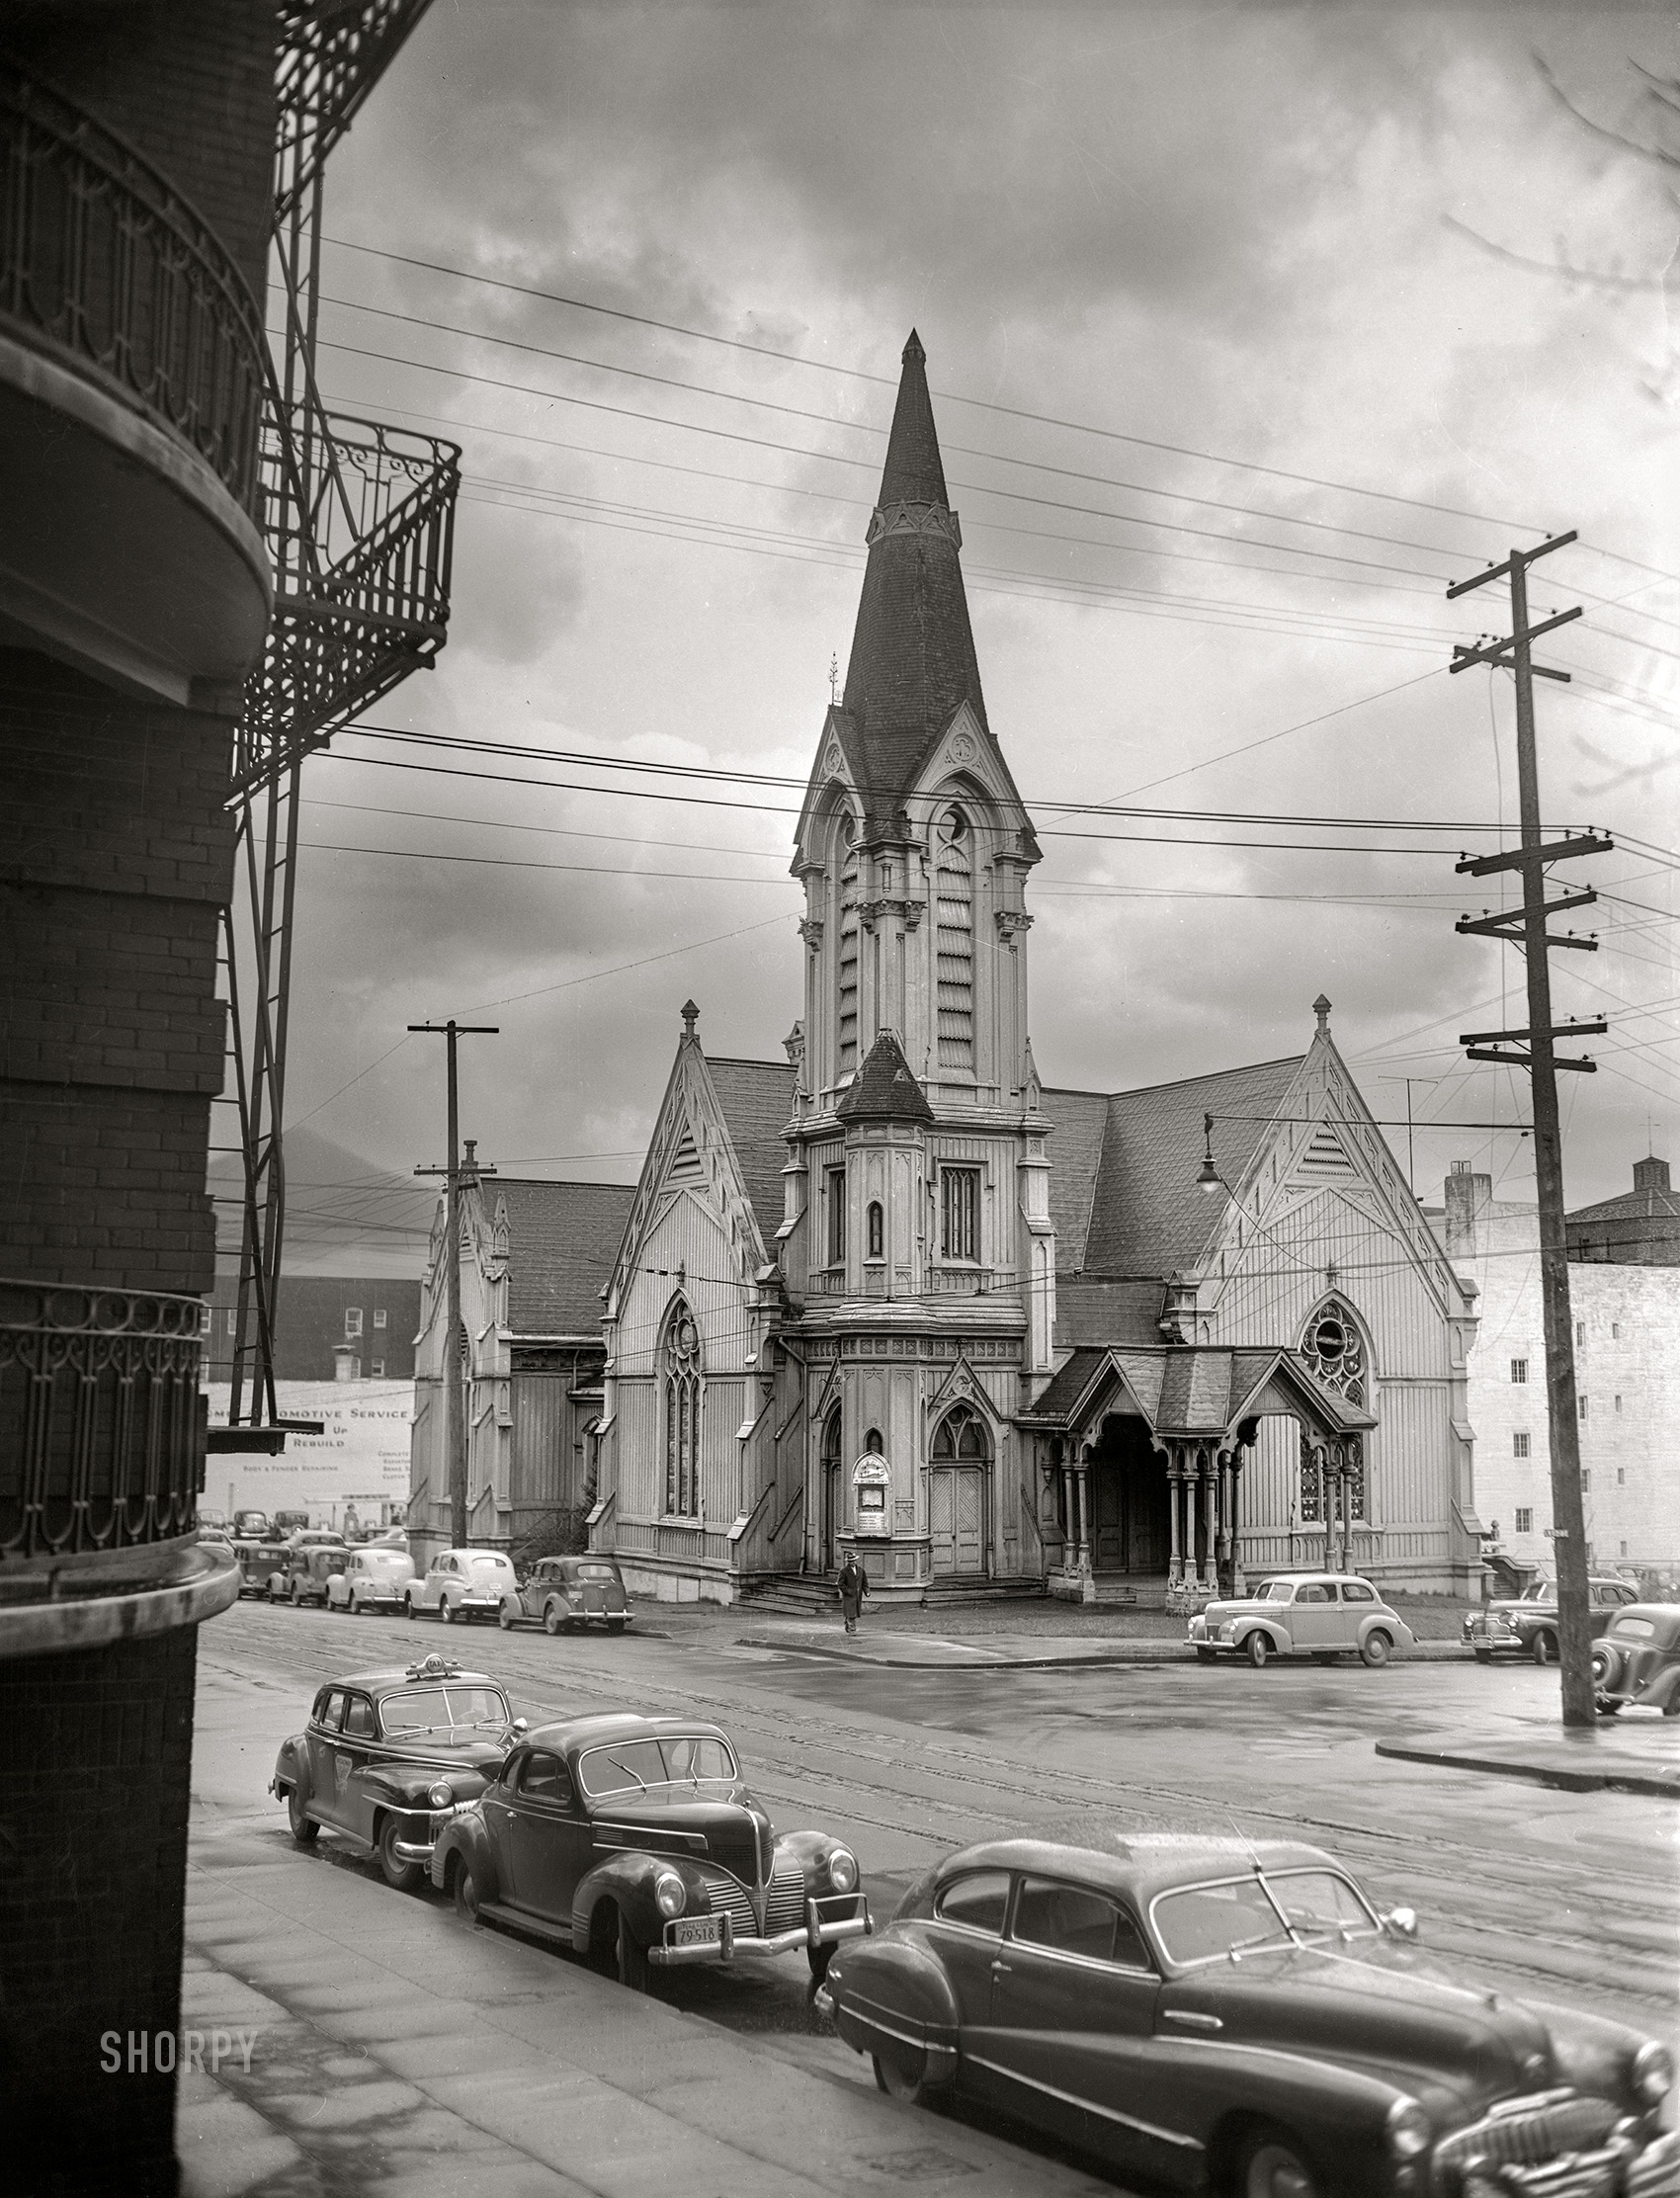 Portland, Oregon, 1948. "Calvary Presbyterian Church." Completed in 1882 and now known simply as The Old Church. Acetate negative from the News Photo Archive. View full size.